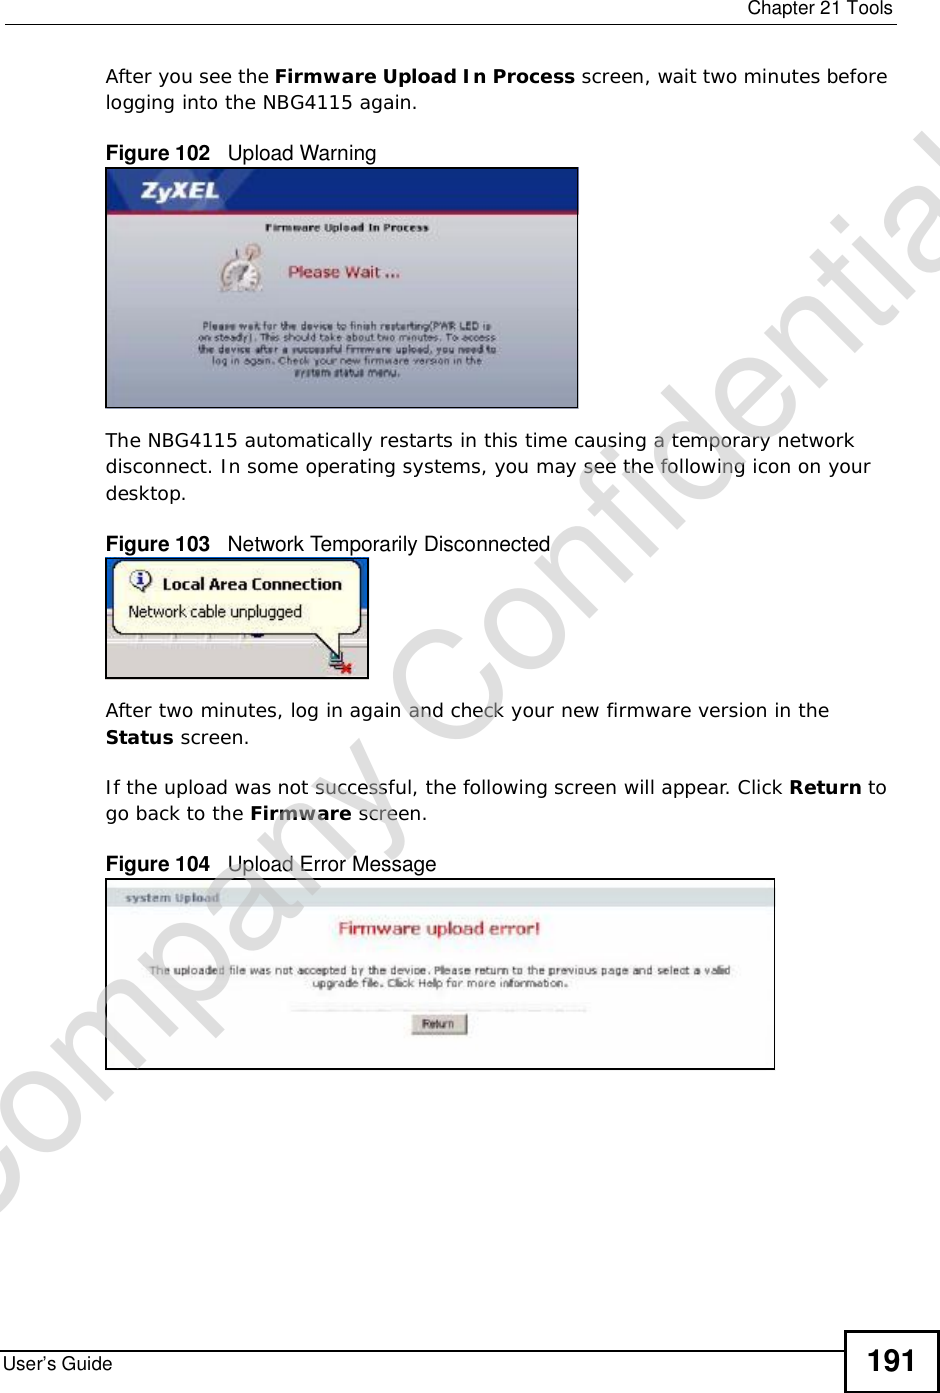  Chapter 21ToolsUser’s Guide 191After you see the Firmware Upload In Process screen, wait two minutes before logging into the NBG4115 again.Figure 102   Upload WarningThe NBG4115 automatically restarts in this time causing a temporary network disconnect. In some operating systems, you may see the following icon on your desktop.Figure 103   Network Temporarily DisconnectedAfter two minutes, log in again and check your new firmware version in the Status screen.If the upload was not successful, the following screen will appear. Click Return to go back to the Firmware screen.Figure 104   Upload Error MessageCompany Confidential